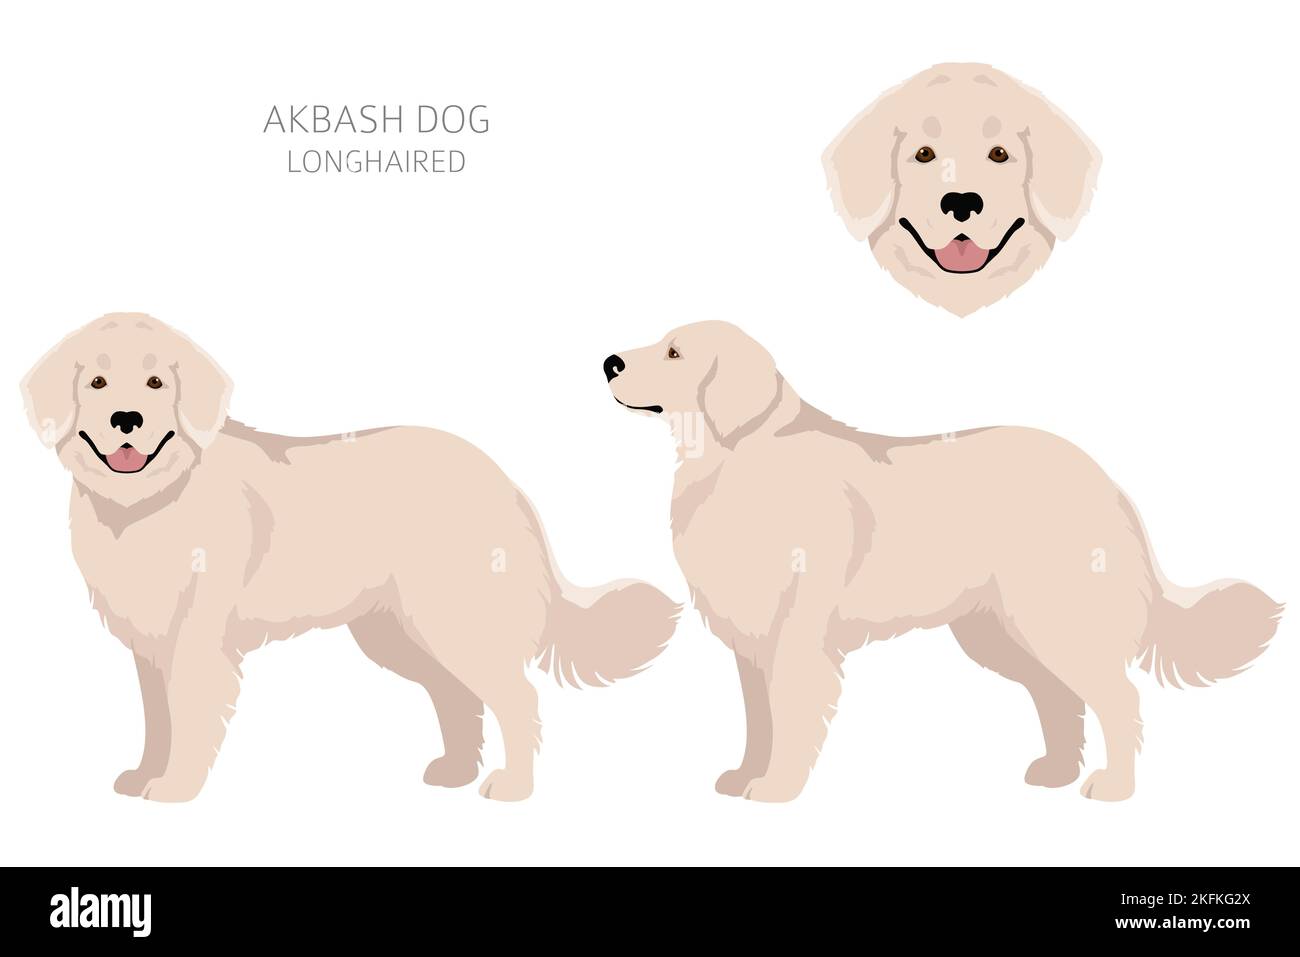 Akbash dog longhaired clipart. Different poses, coat colors set.  Vector illustration Stock Vector